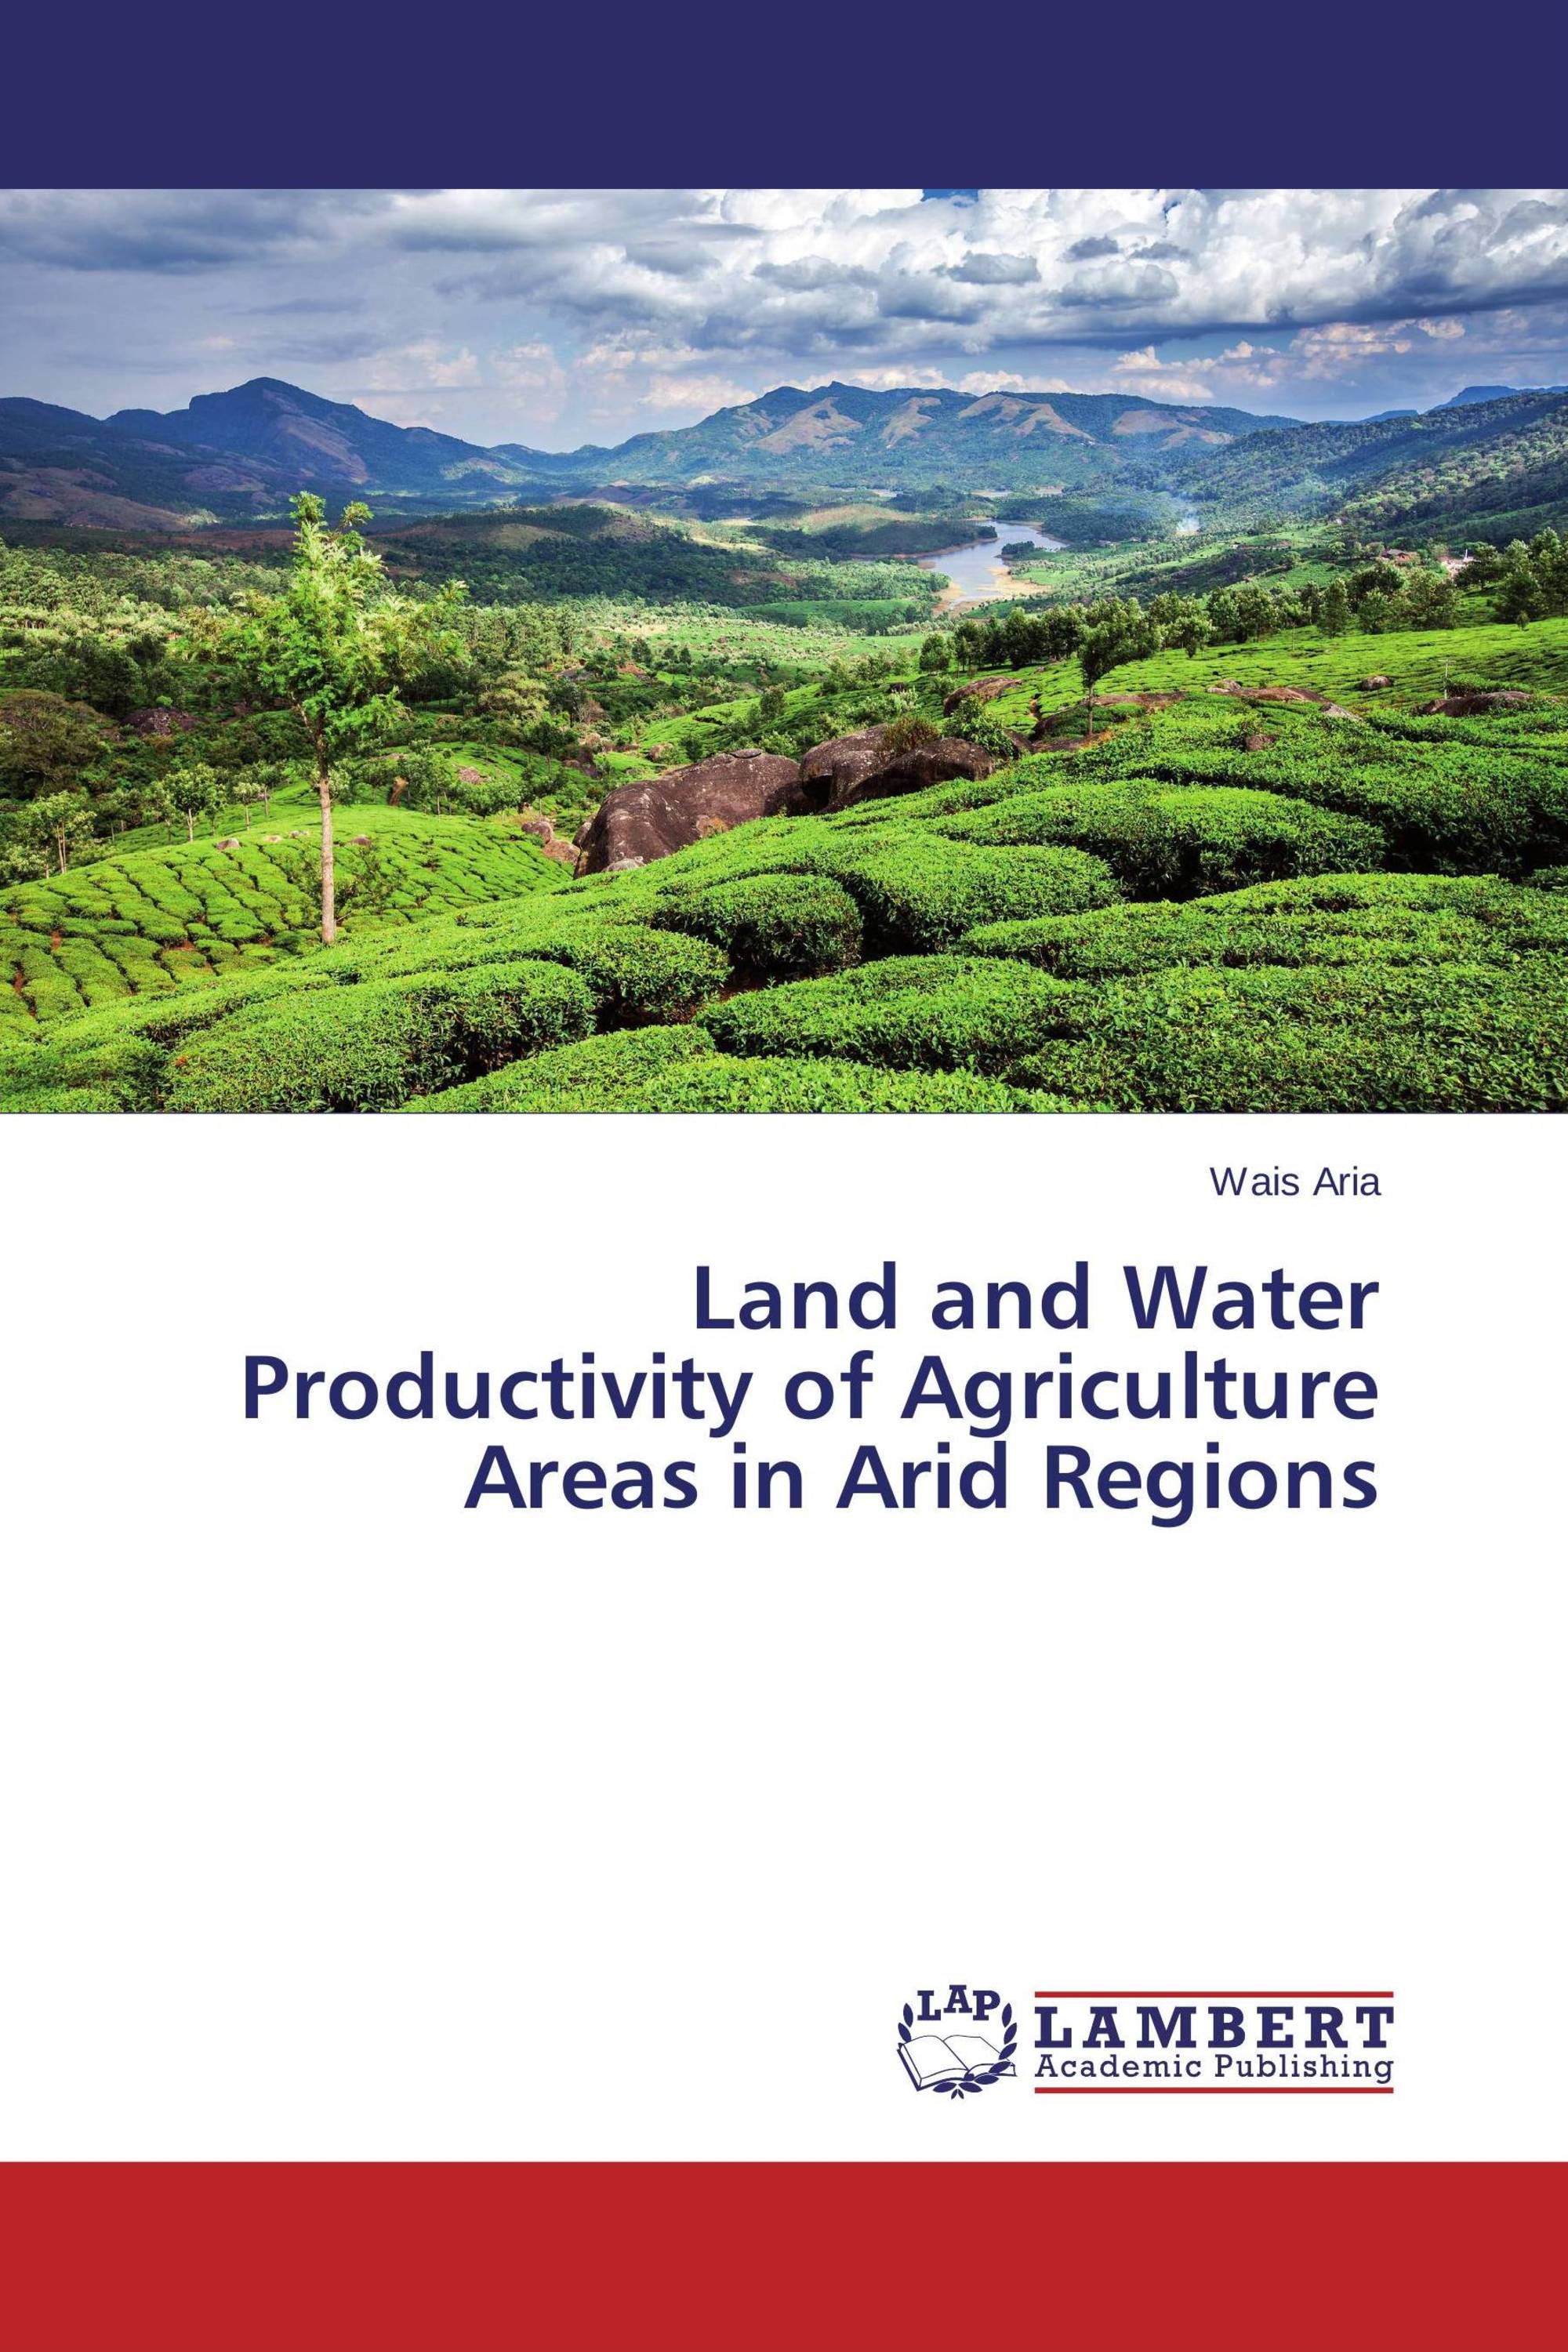 Land and Water Productivity of Agriculture Areas in Arid Regions